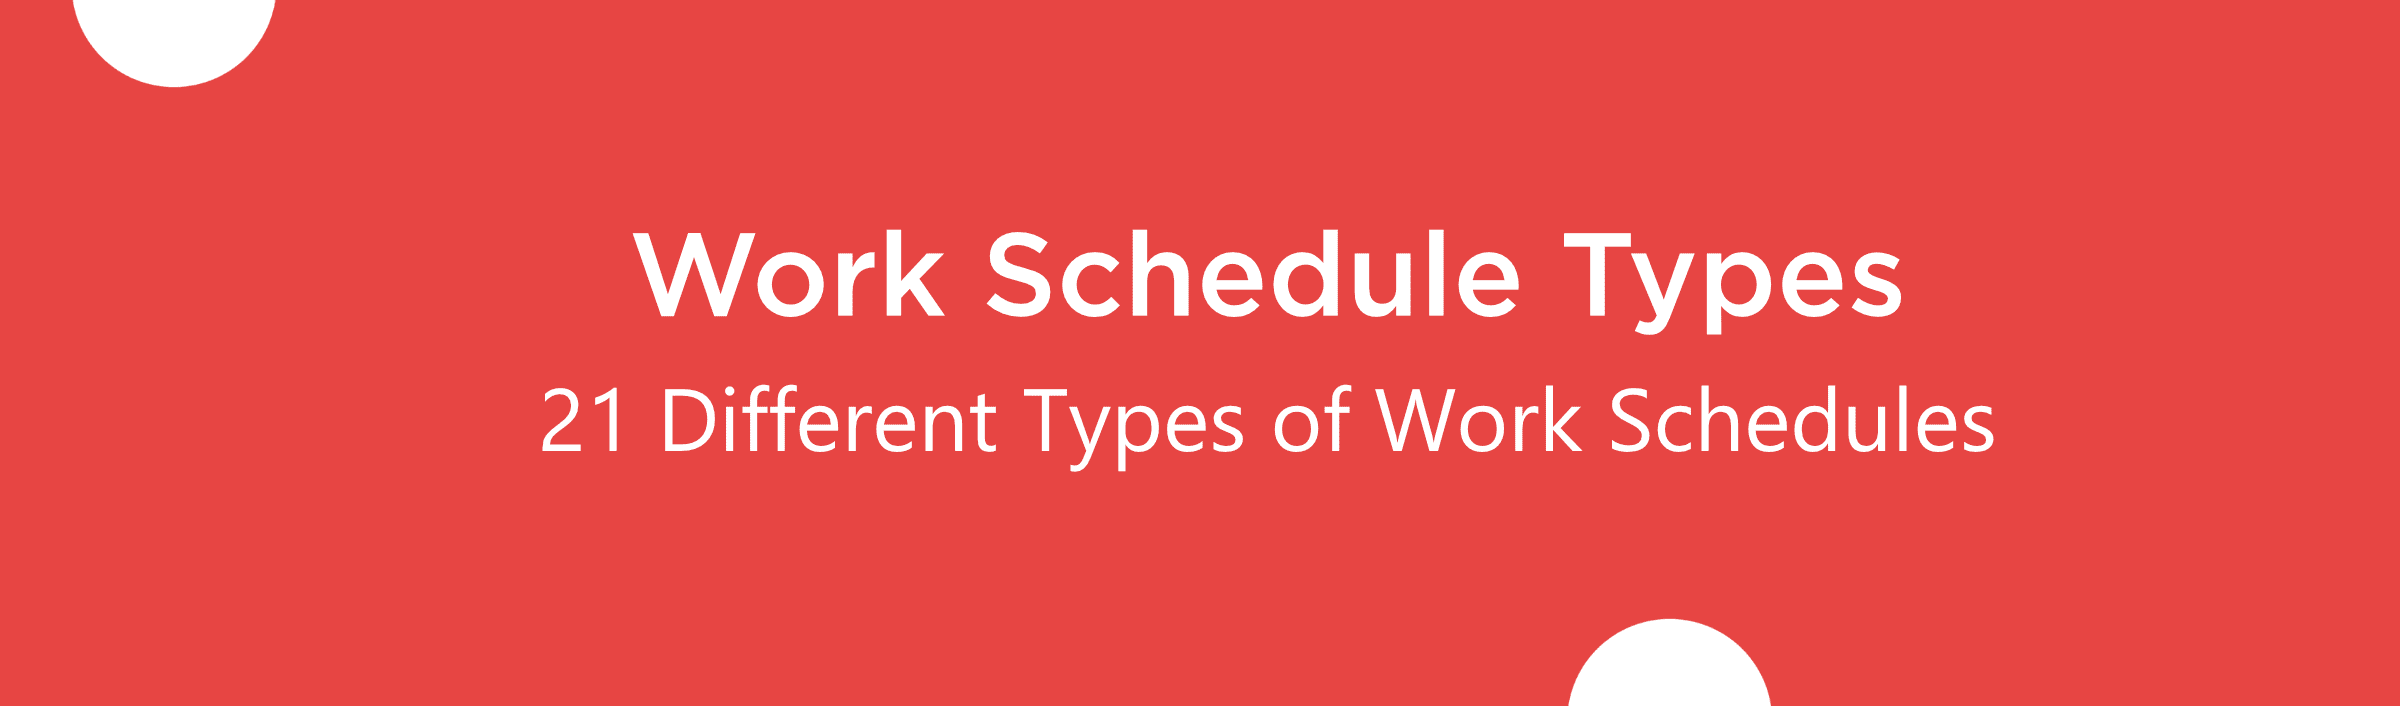 Work Schedule Types: 21 Different Types of Work Schedules, Its Importance & How to Create One